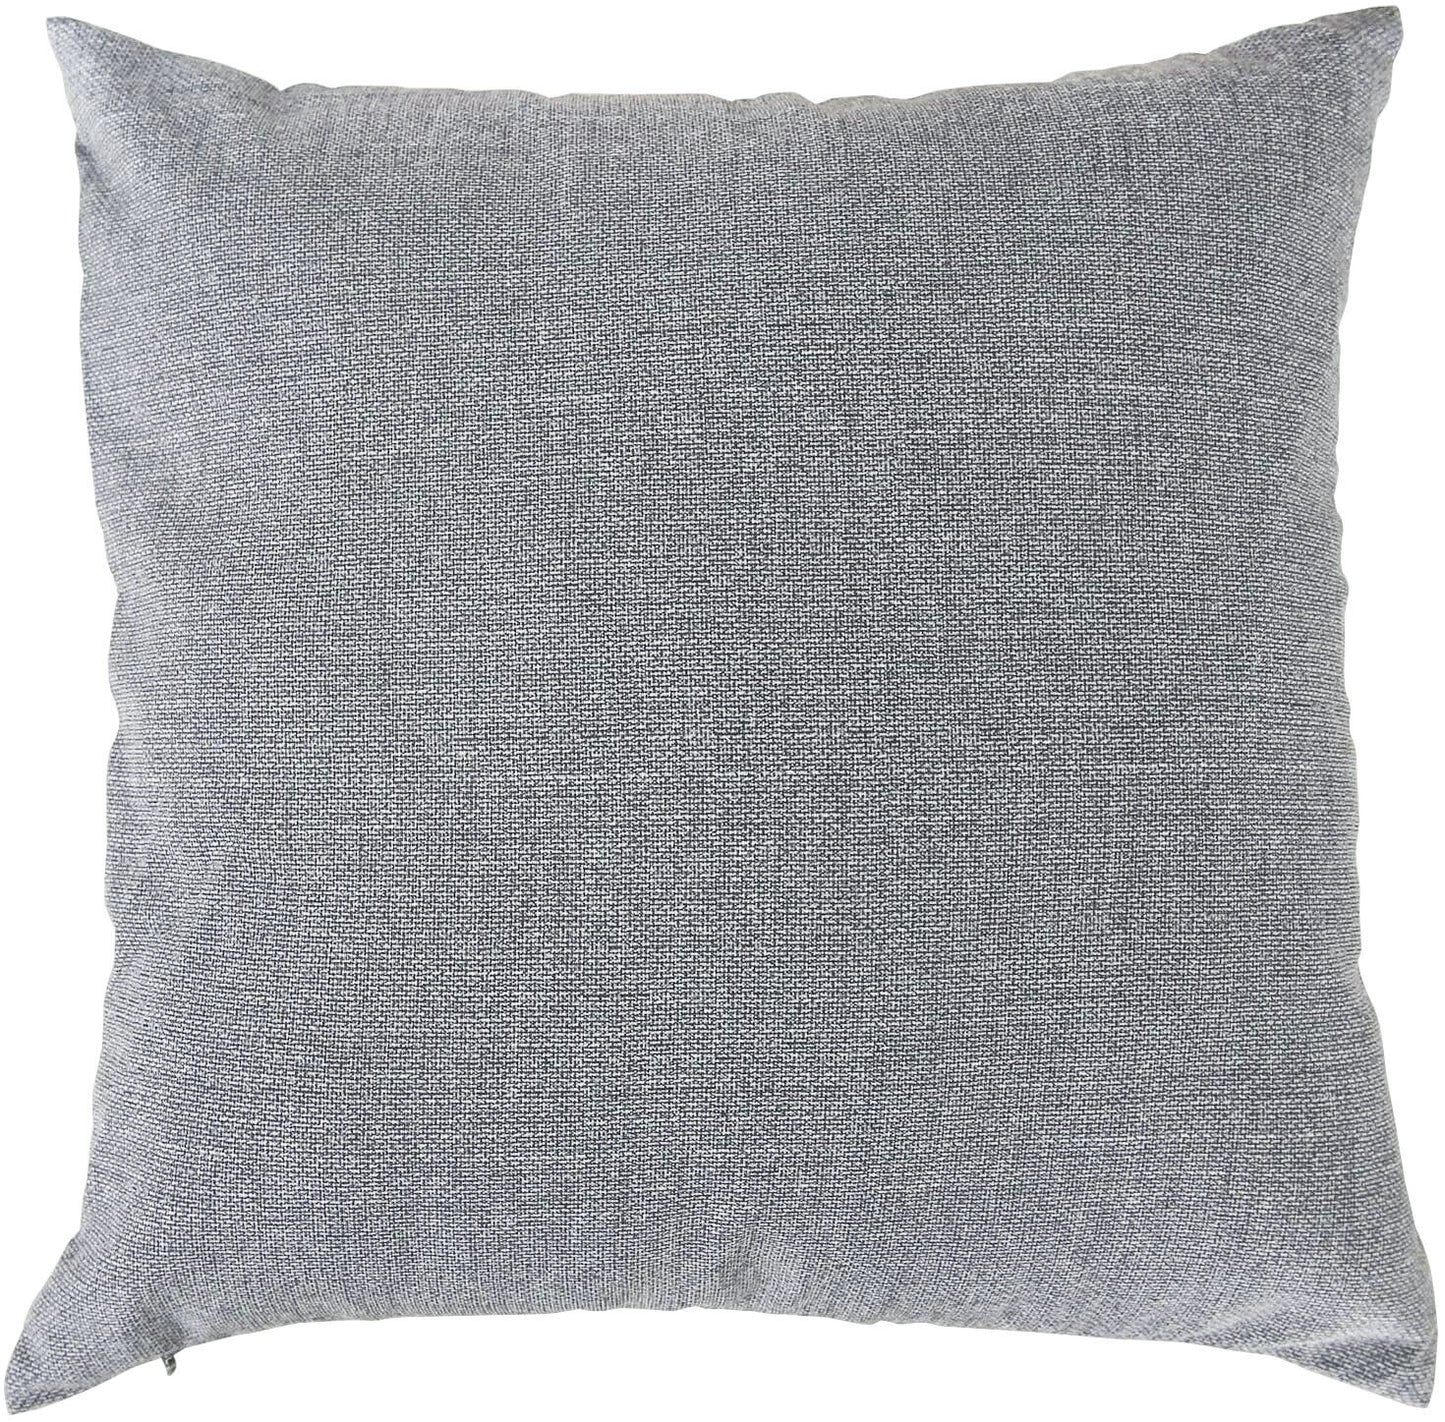 2Panels Cushion Cover Linen Look Home Decorative Couch Pillow without Filling Grey